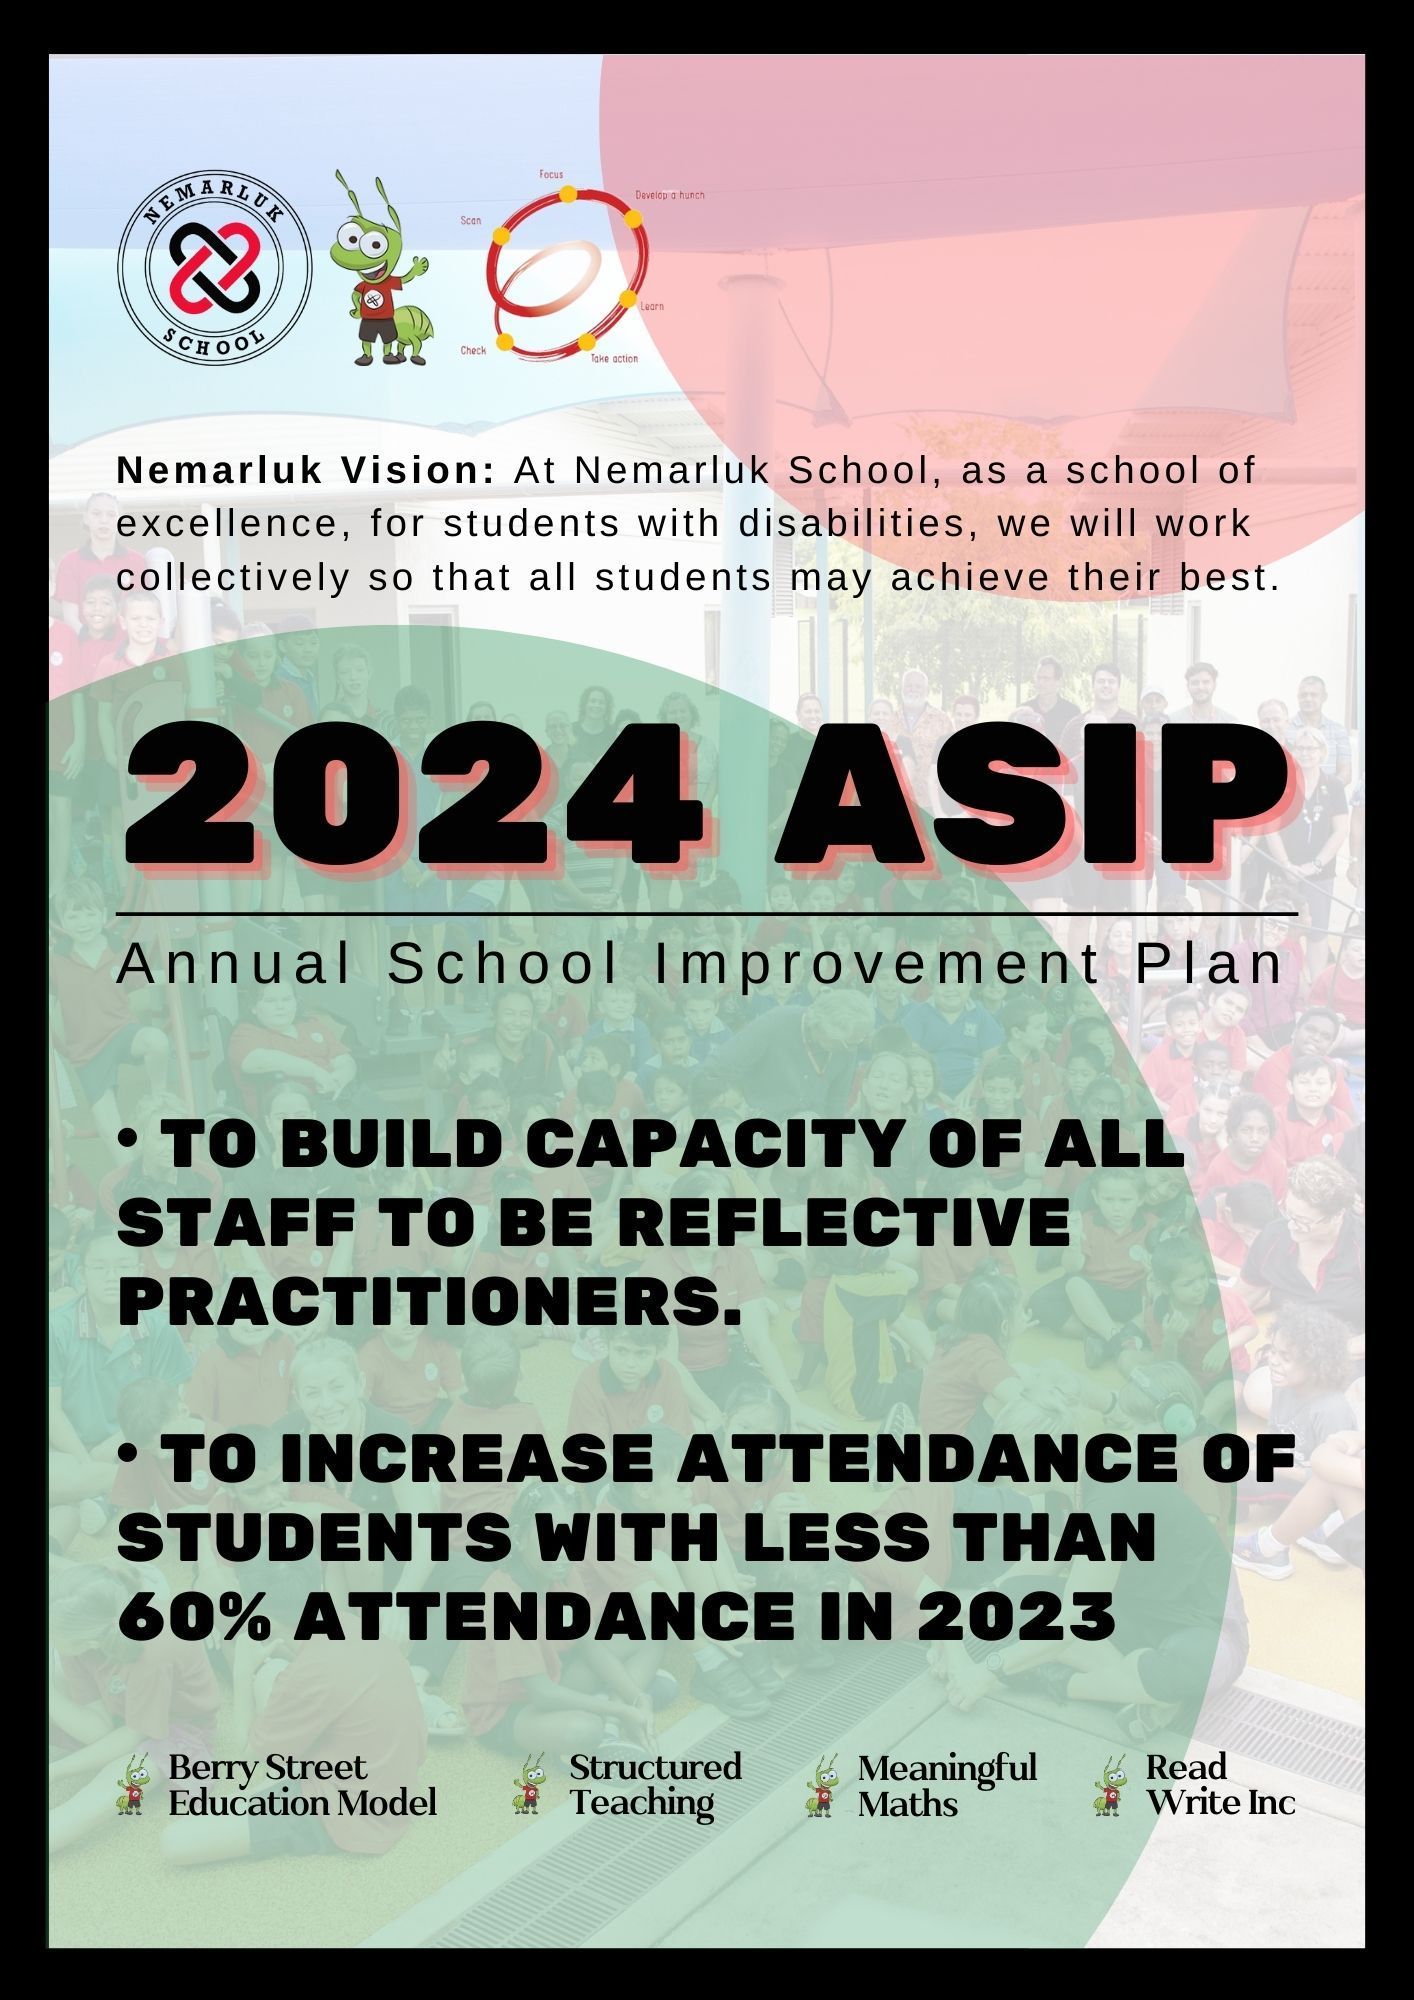 A poster for a school improvement plan for 2024.